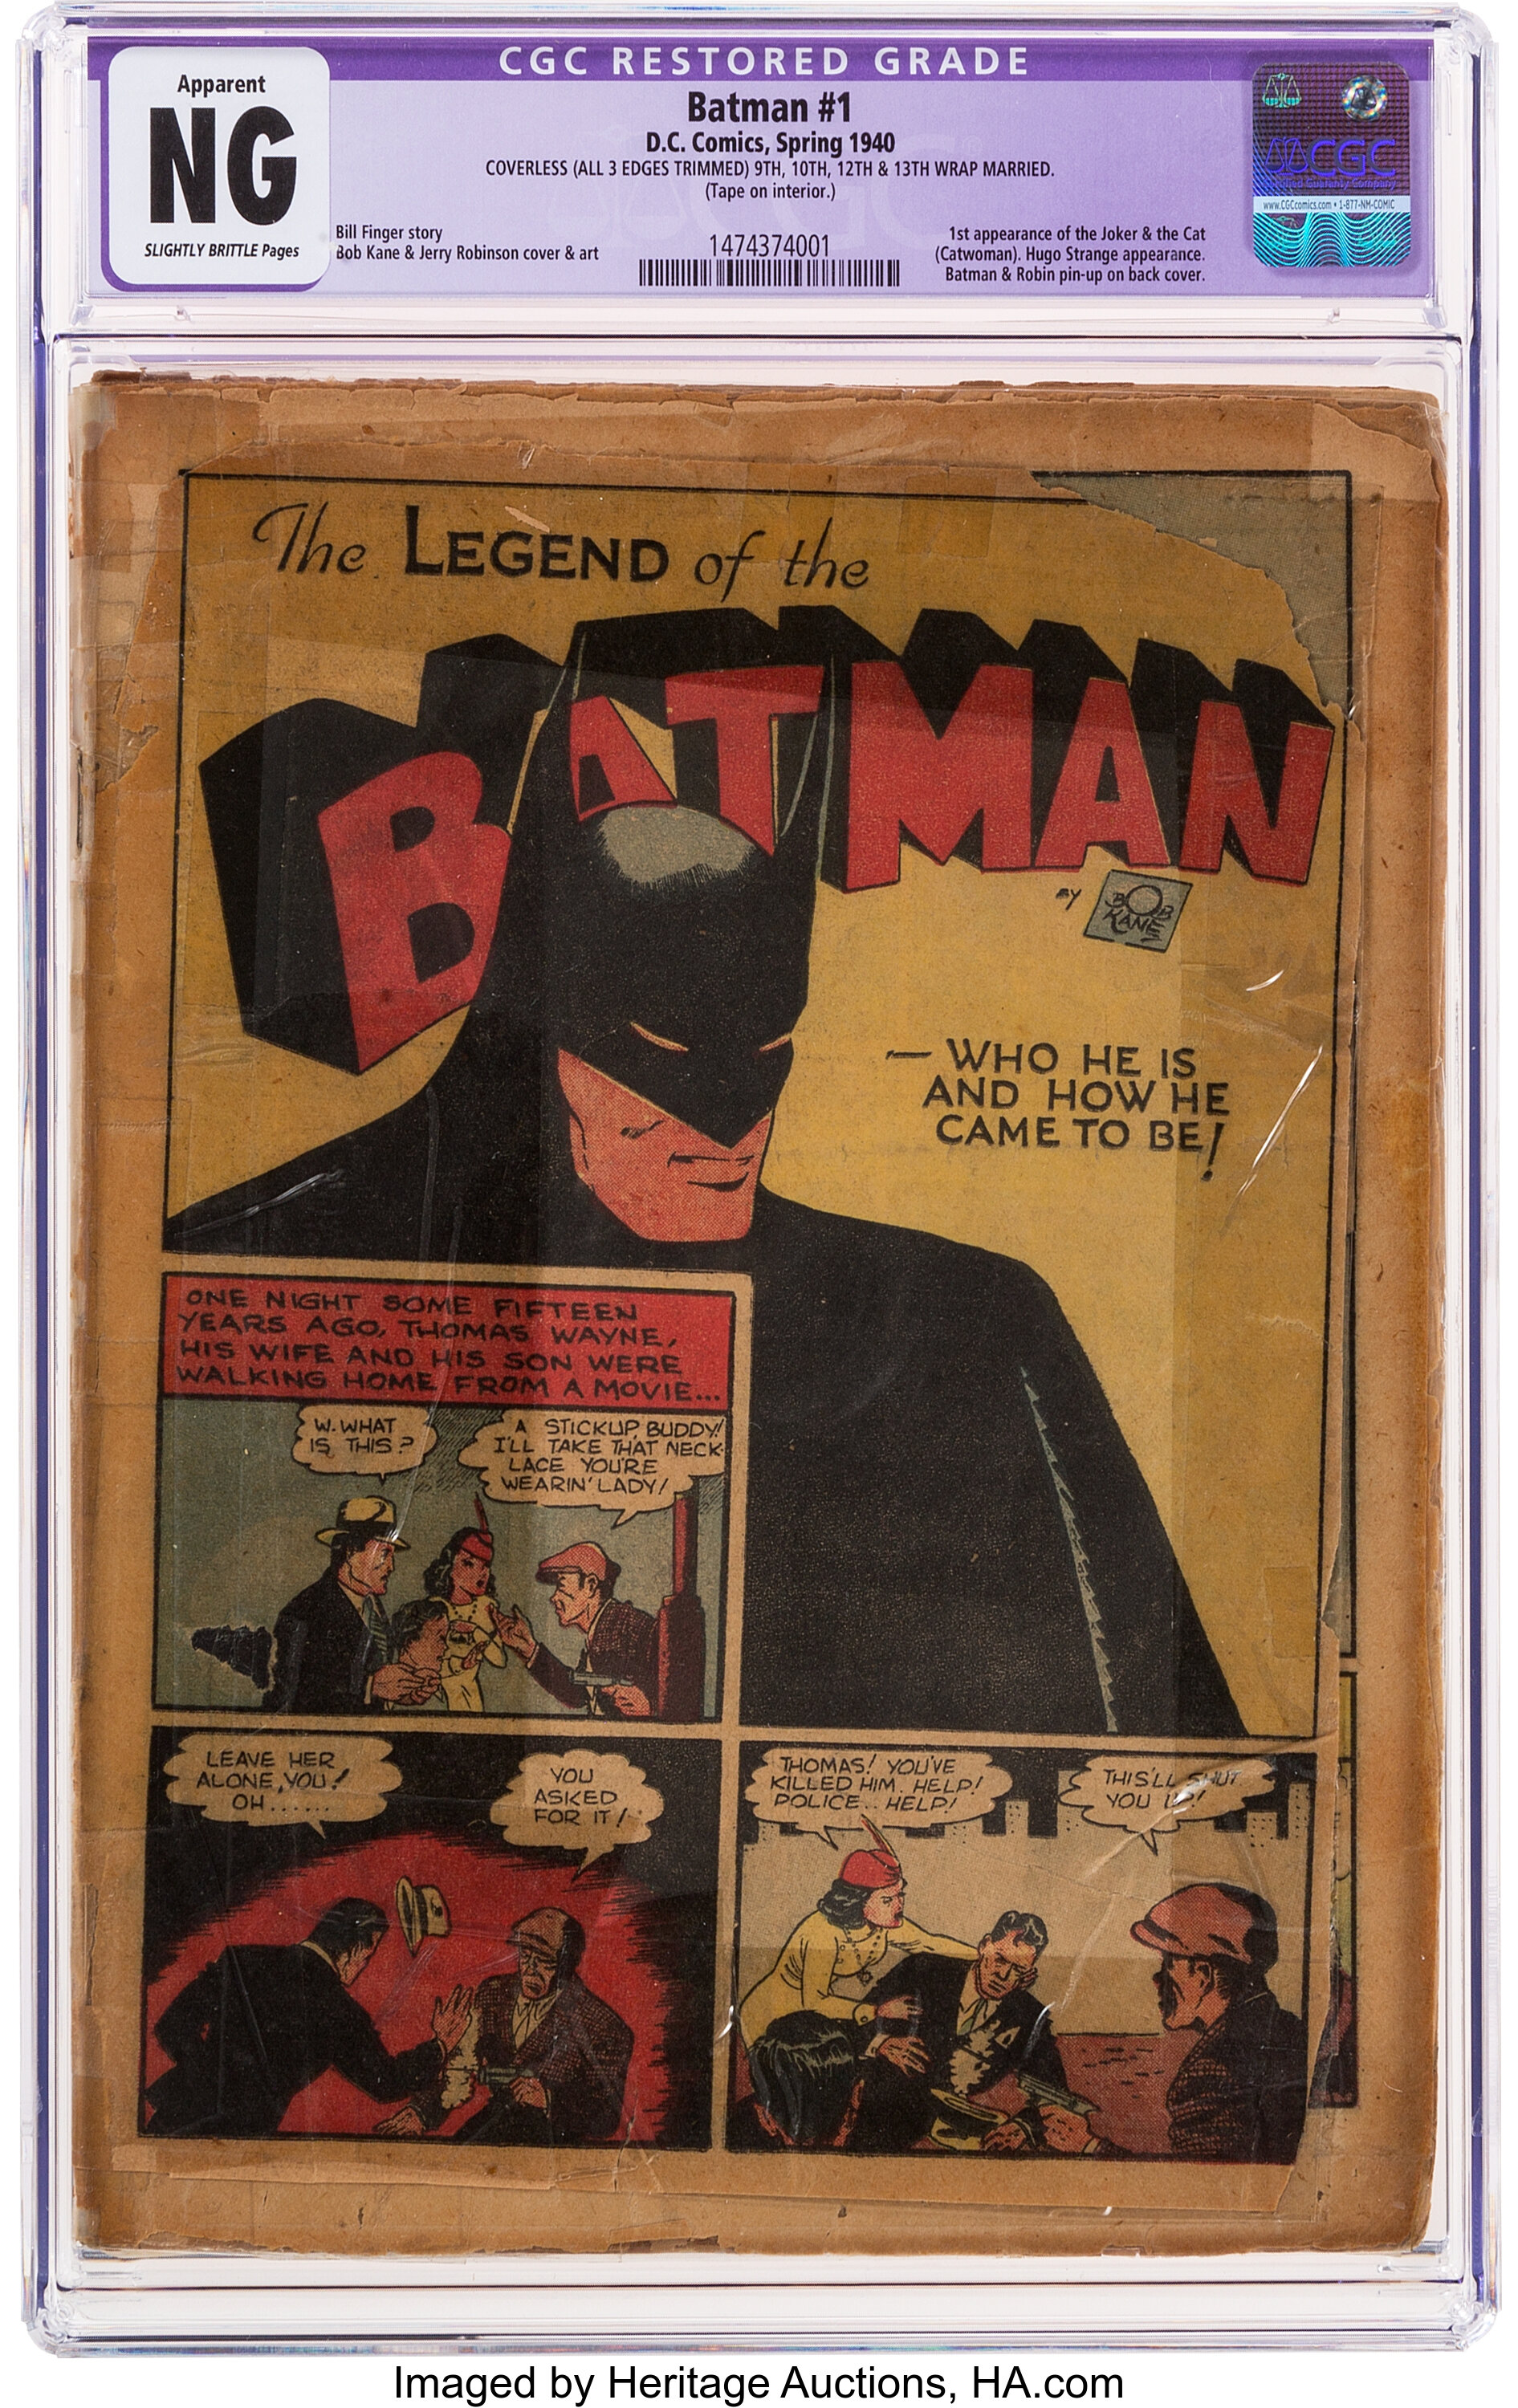 Batman #1 (DC, 1940) CGC Apparent NG (No Grade) Slightly Brittle | Lot  #96348 | Heritage Auctions